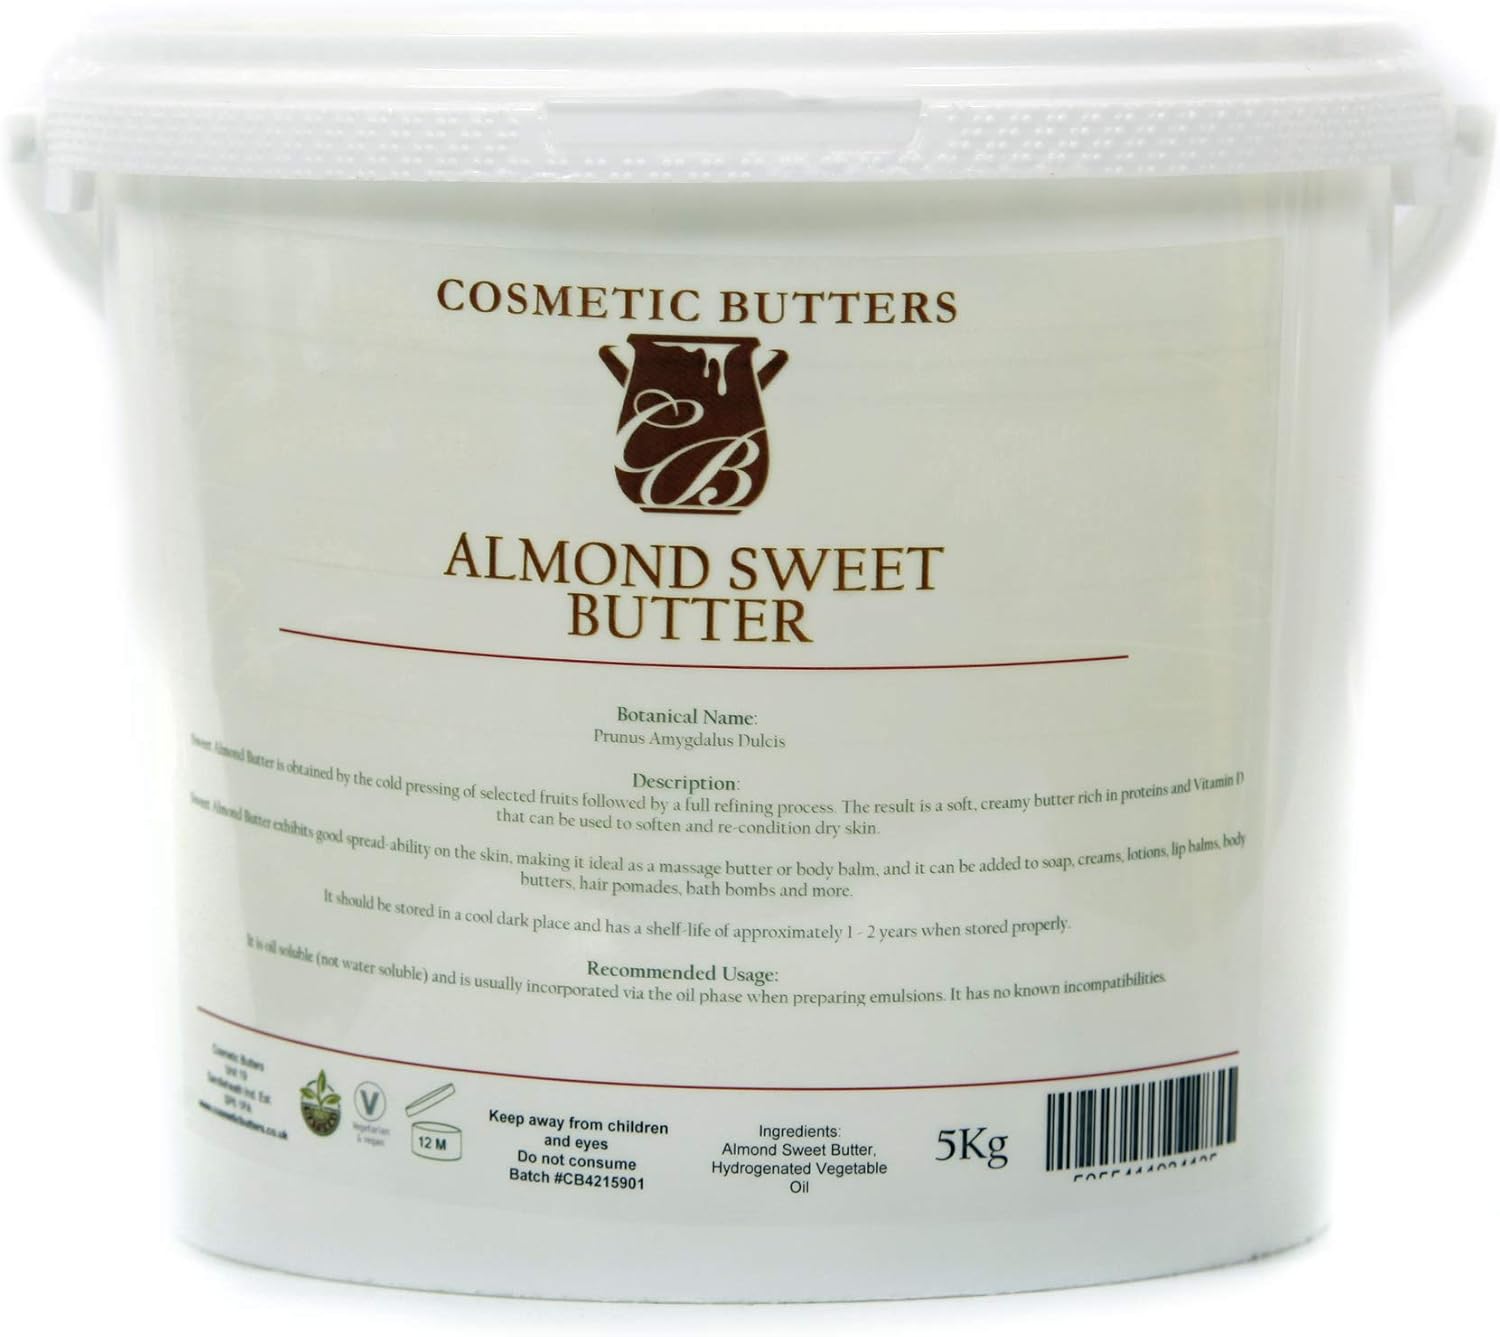 Mystic Moments | Almond Blended Butter 5Kg - Natural Cosmetic Butters Vegan GMO Free